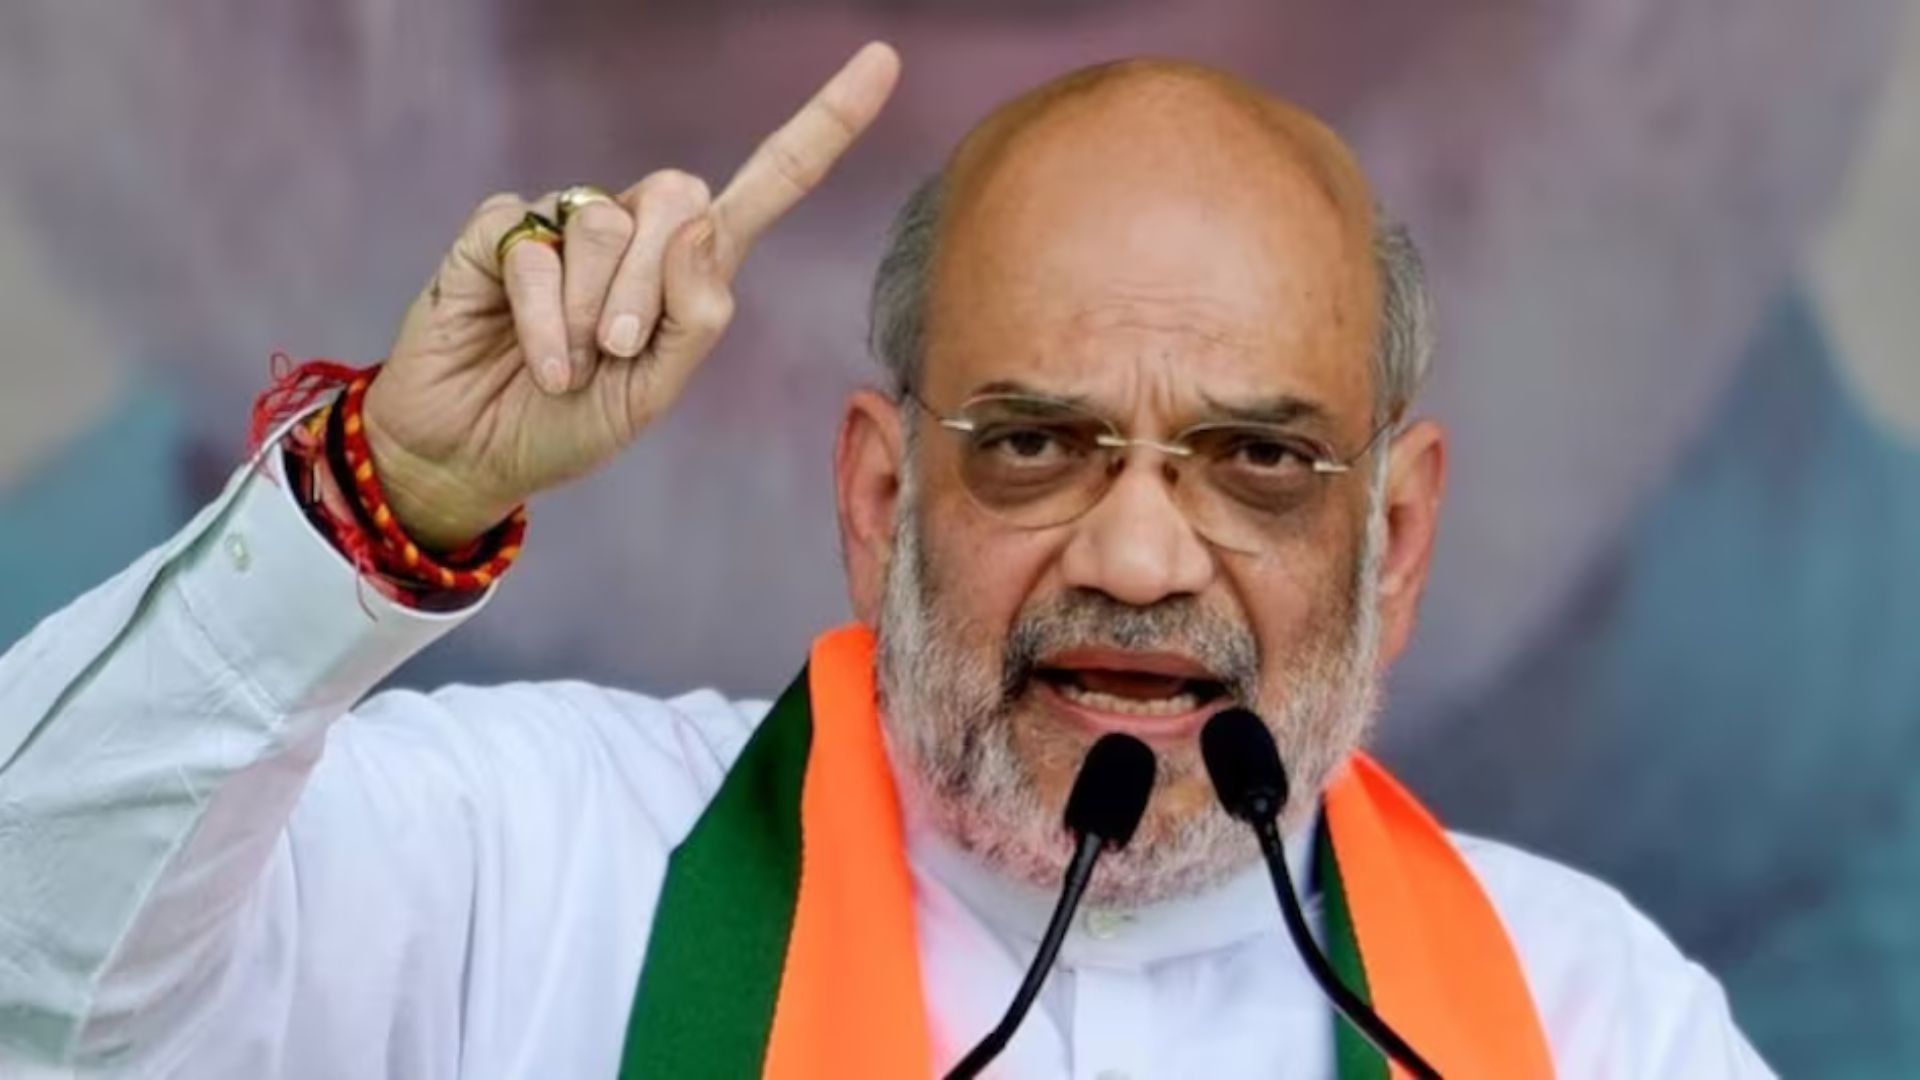 Amit Shah: “Pak-occupied Kashmir is Ours, We Will Take It Back”